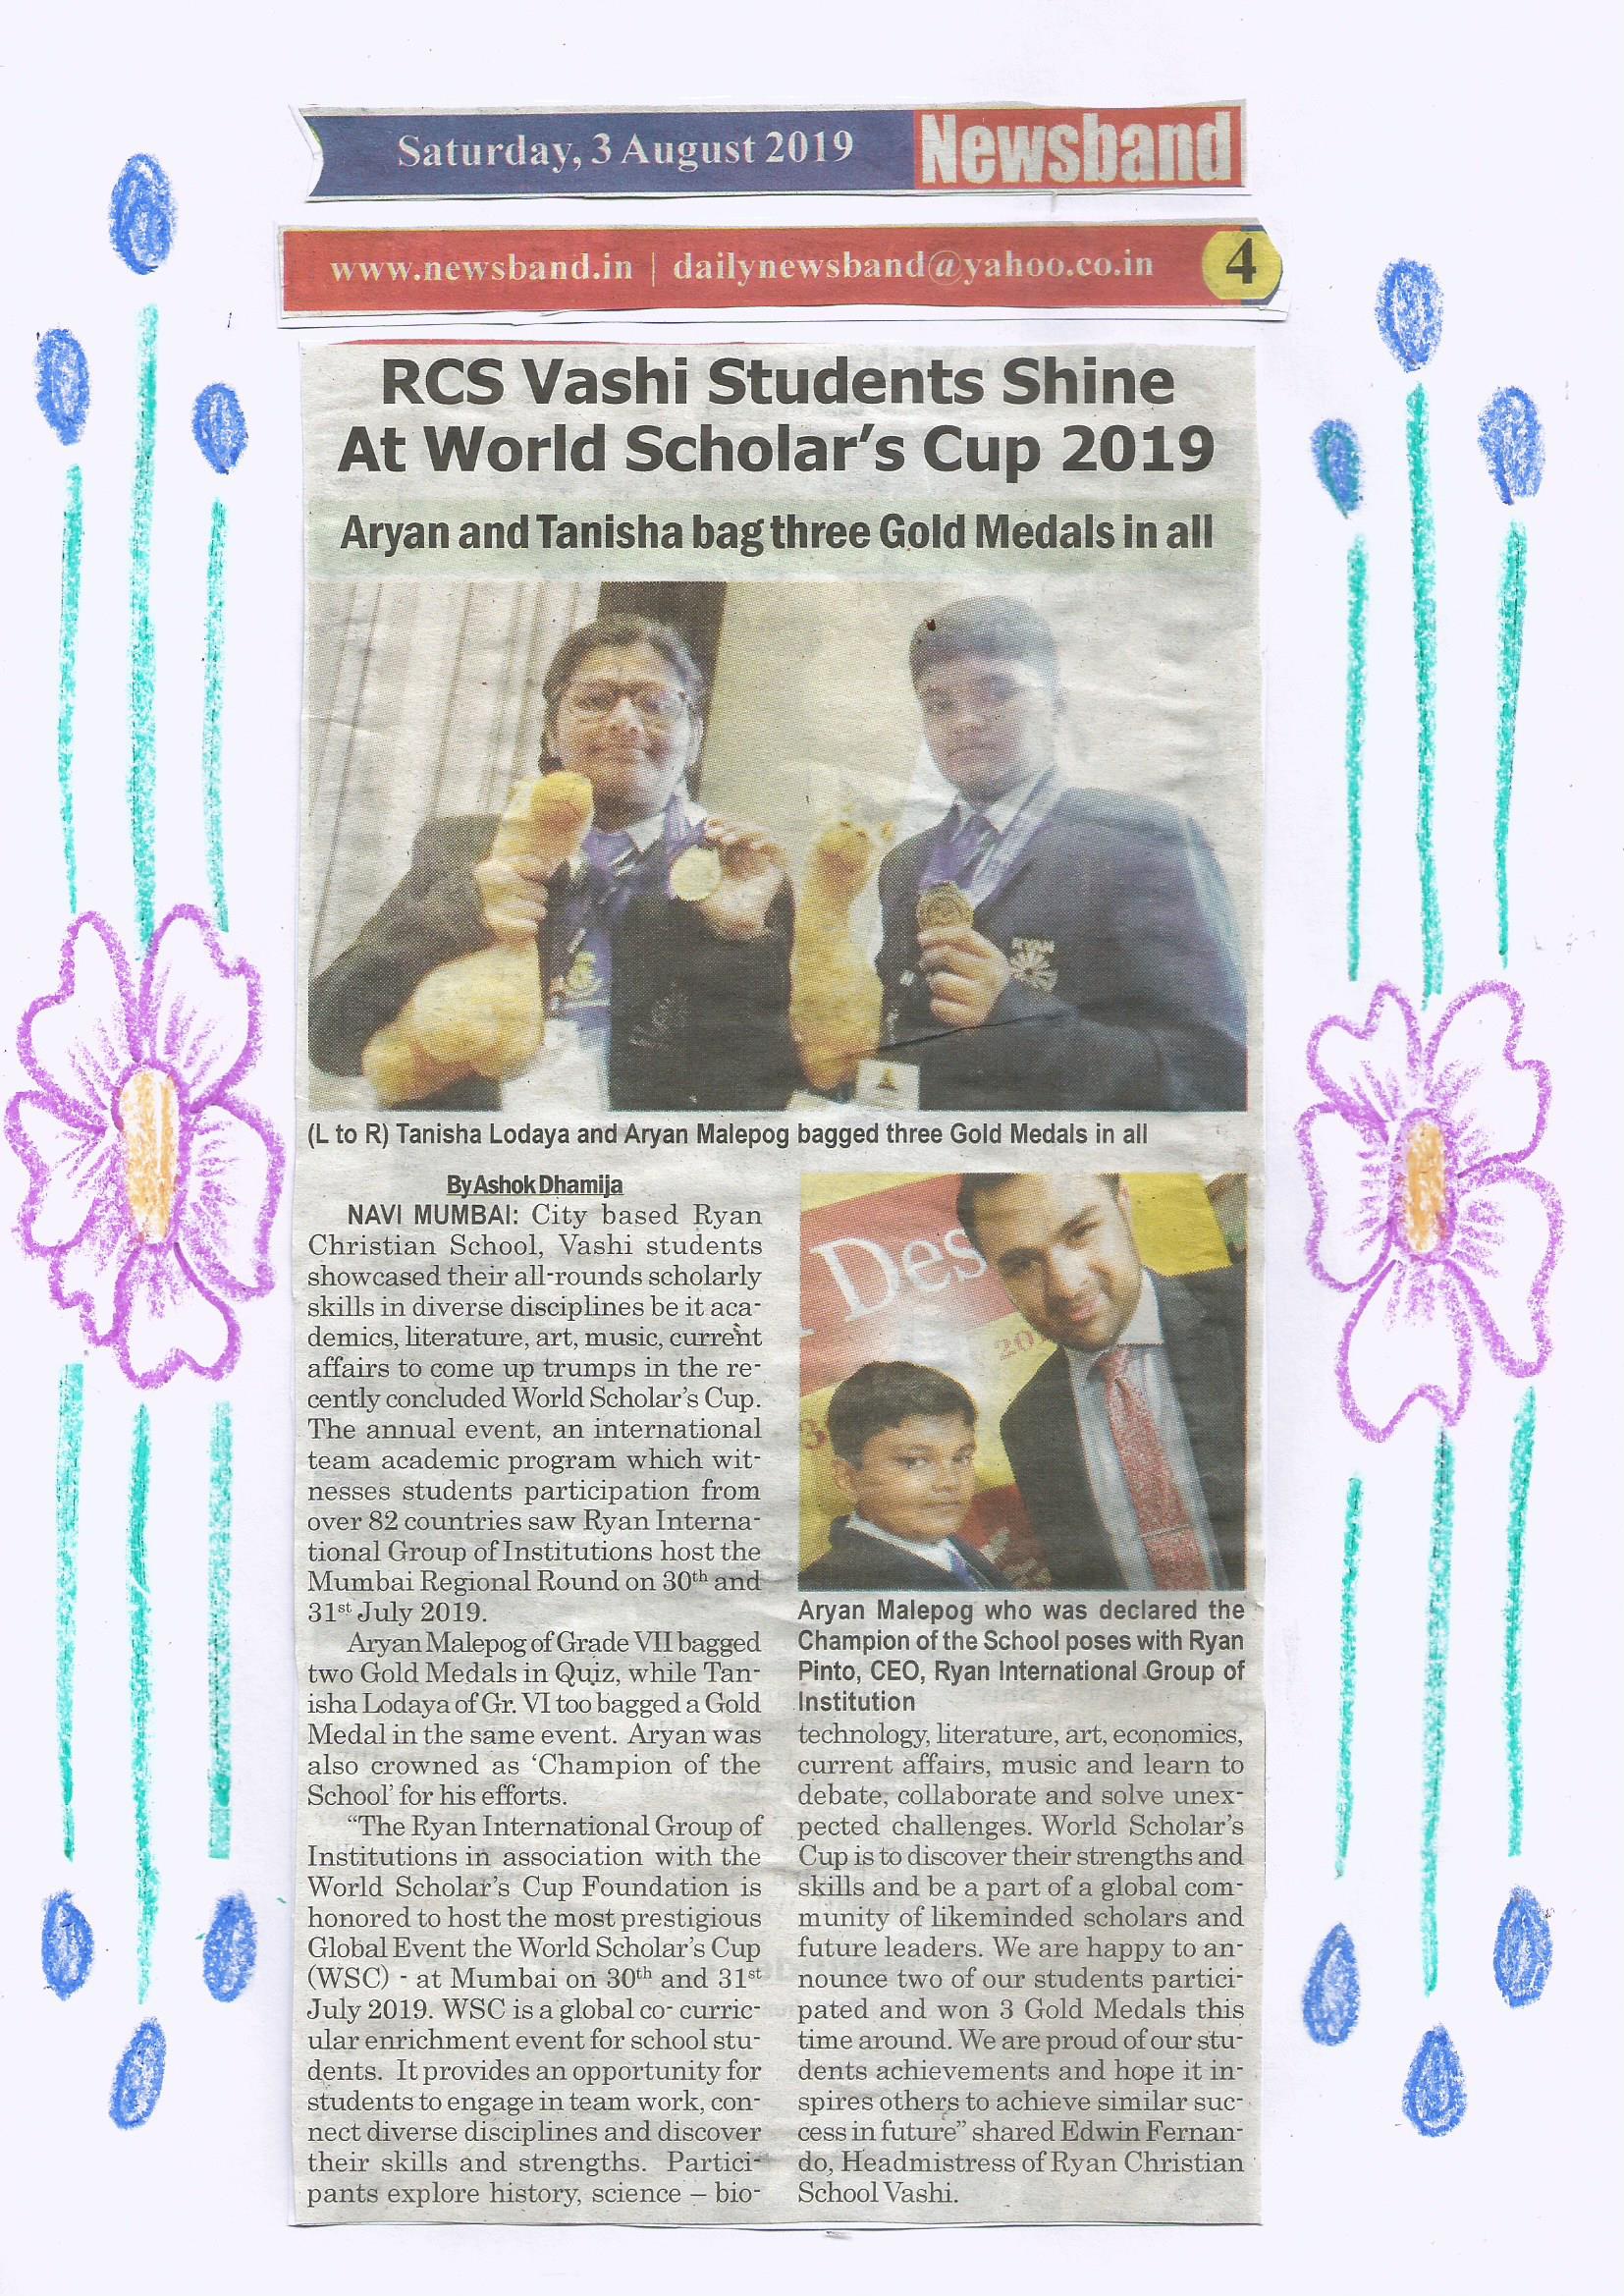 World’s Scholar Cup was featured in Newsband